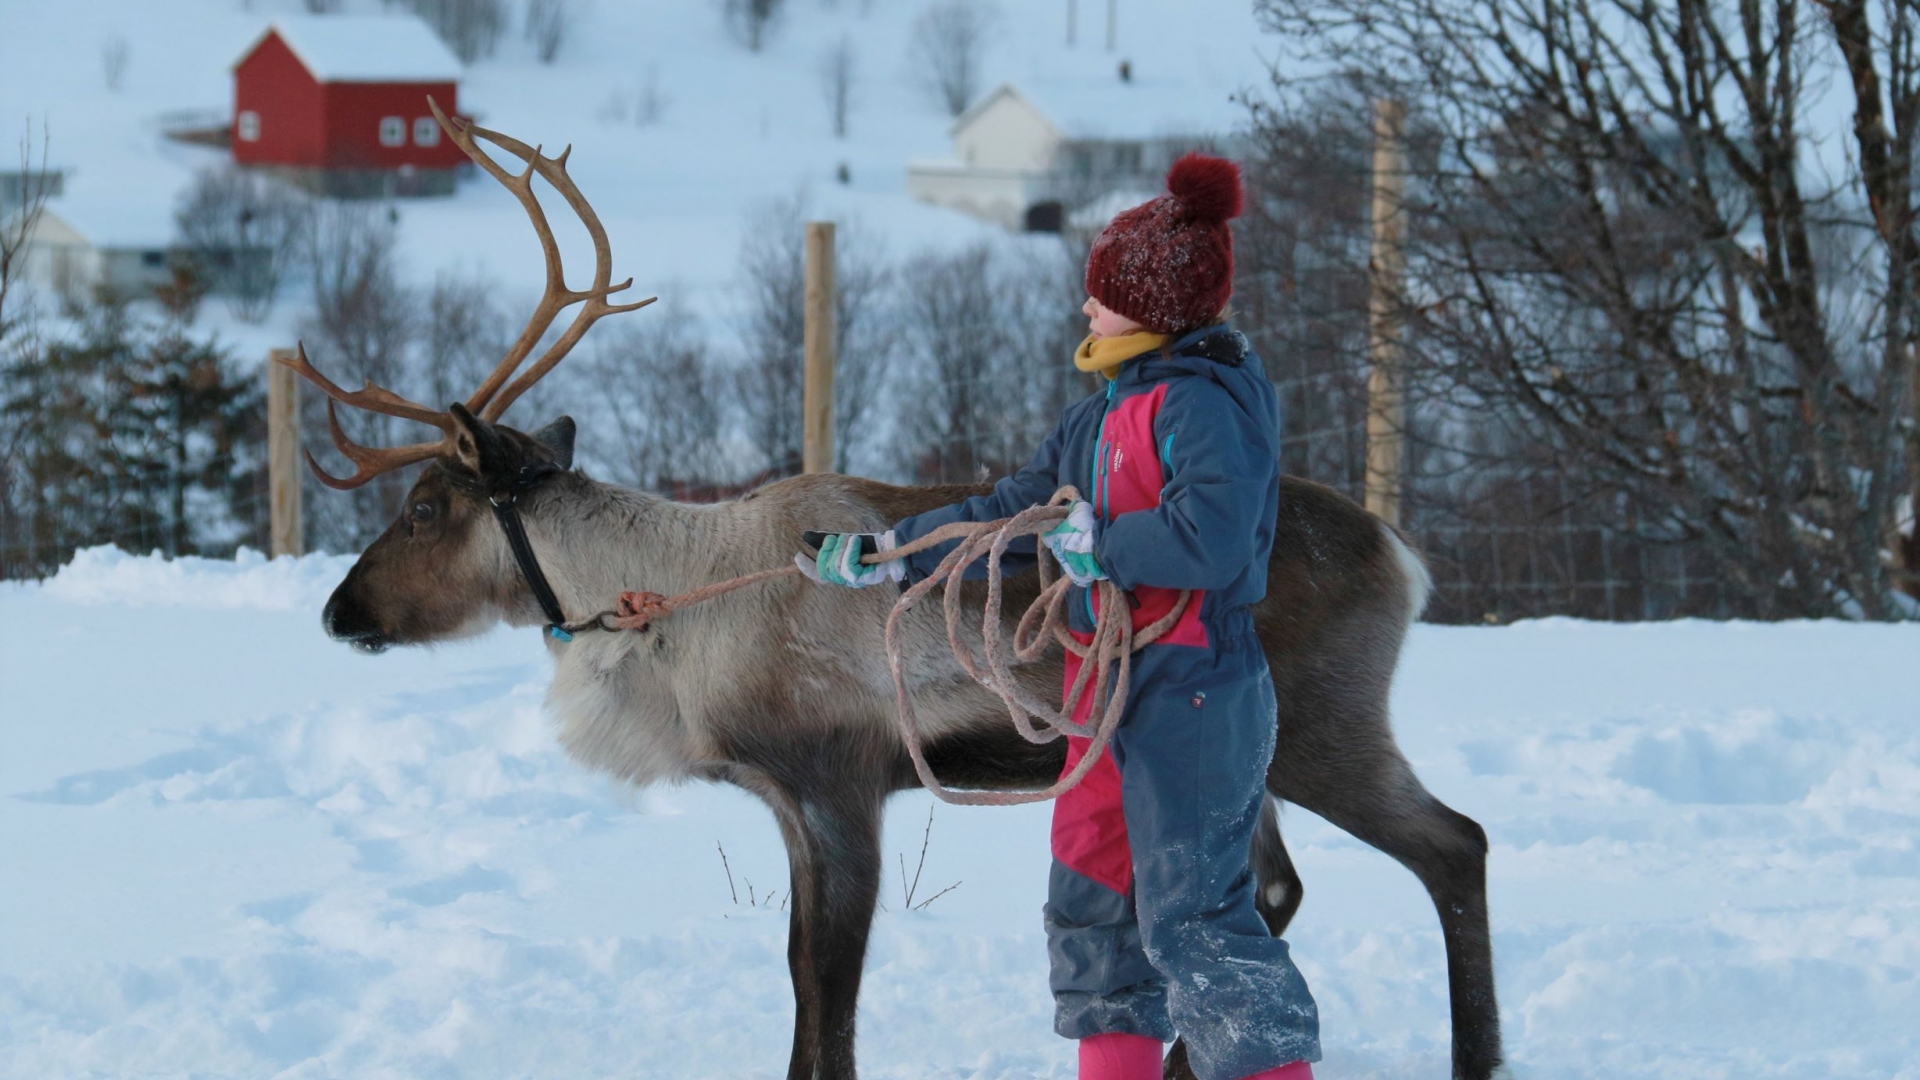 Reindeer and a woman